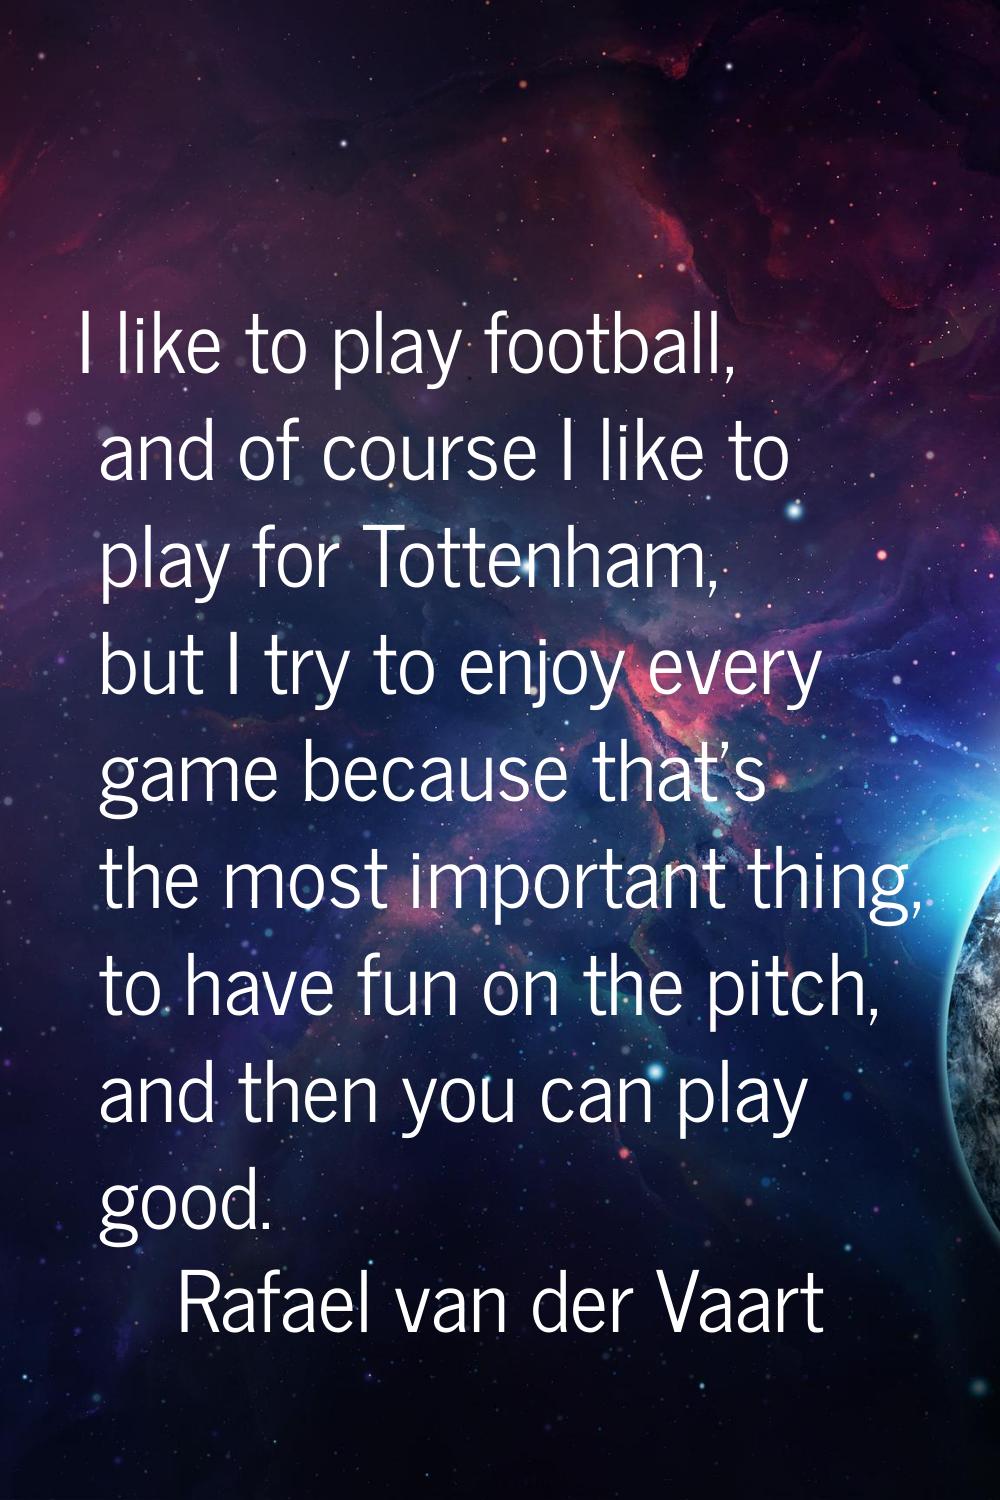 I like to play football, and of course I like to play for Tottenham, but I try to enjoy every game 